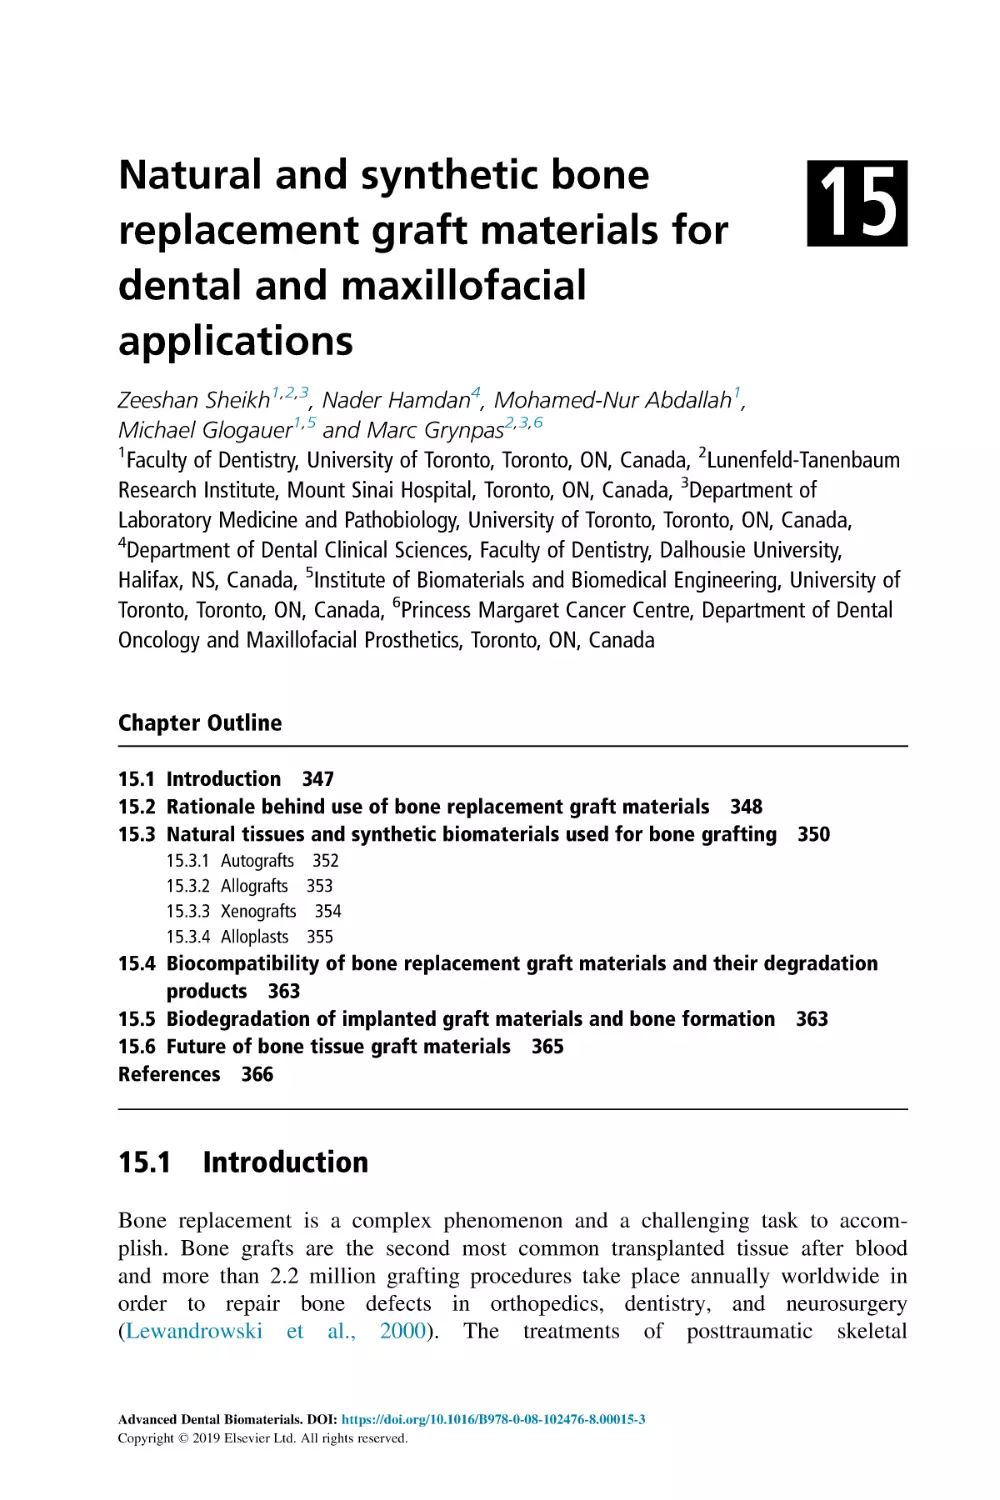 15 Natural and synthetic bone replacement graft materials for dental and maxillofacial applications
Chapter Outline
15.1 Introduction